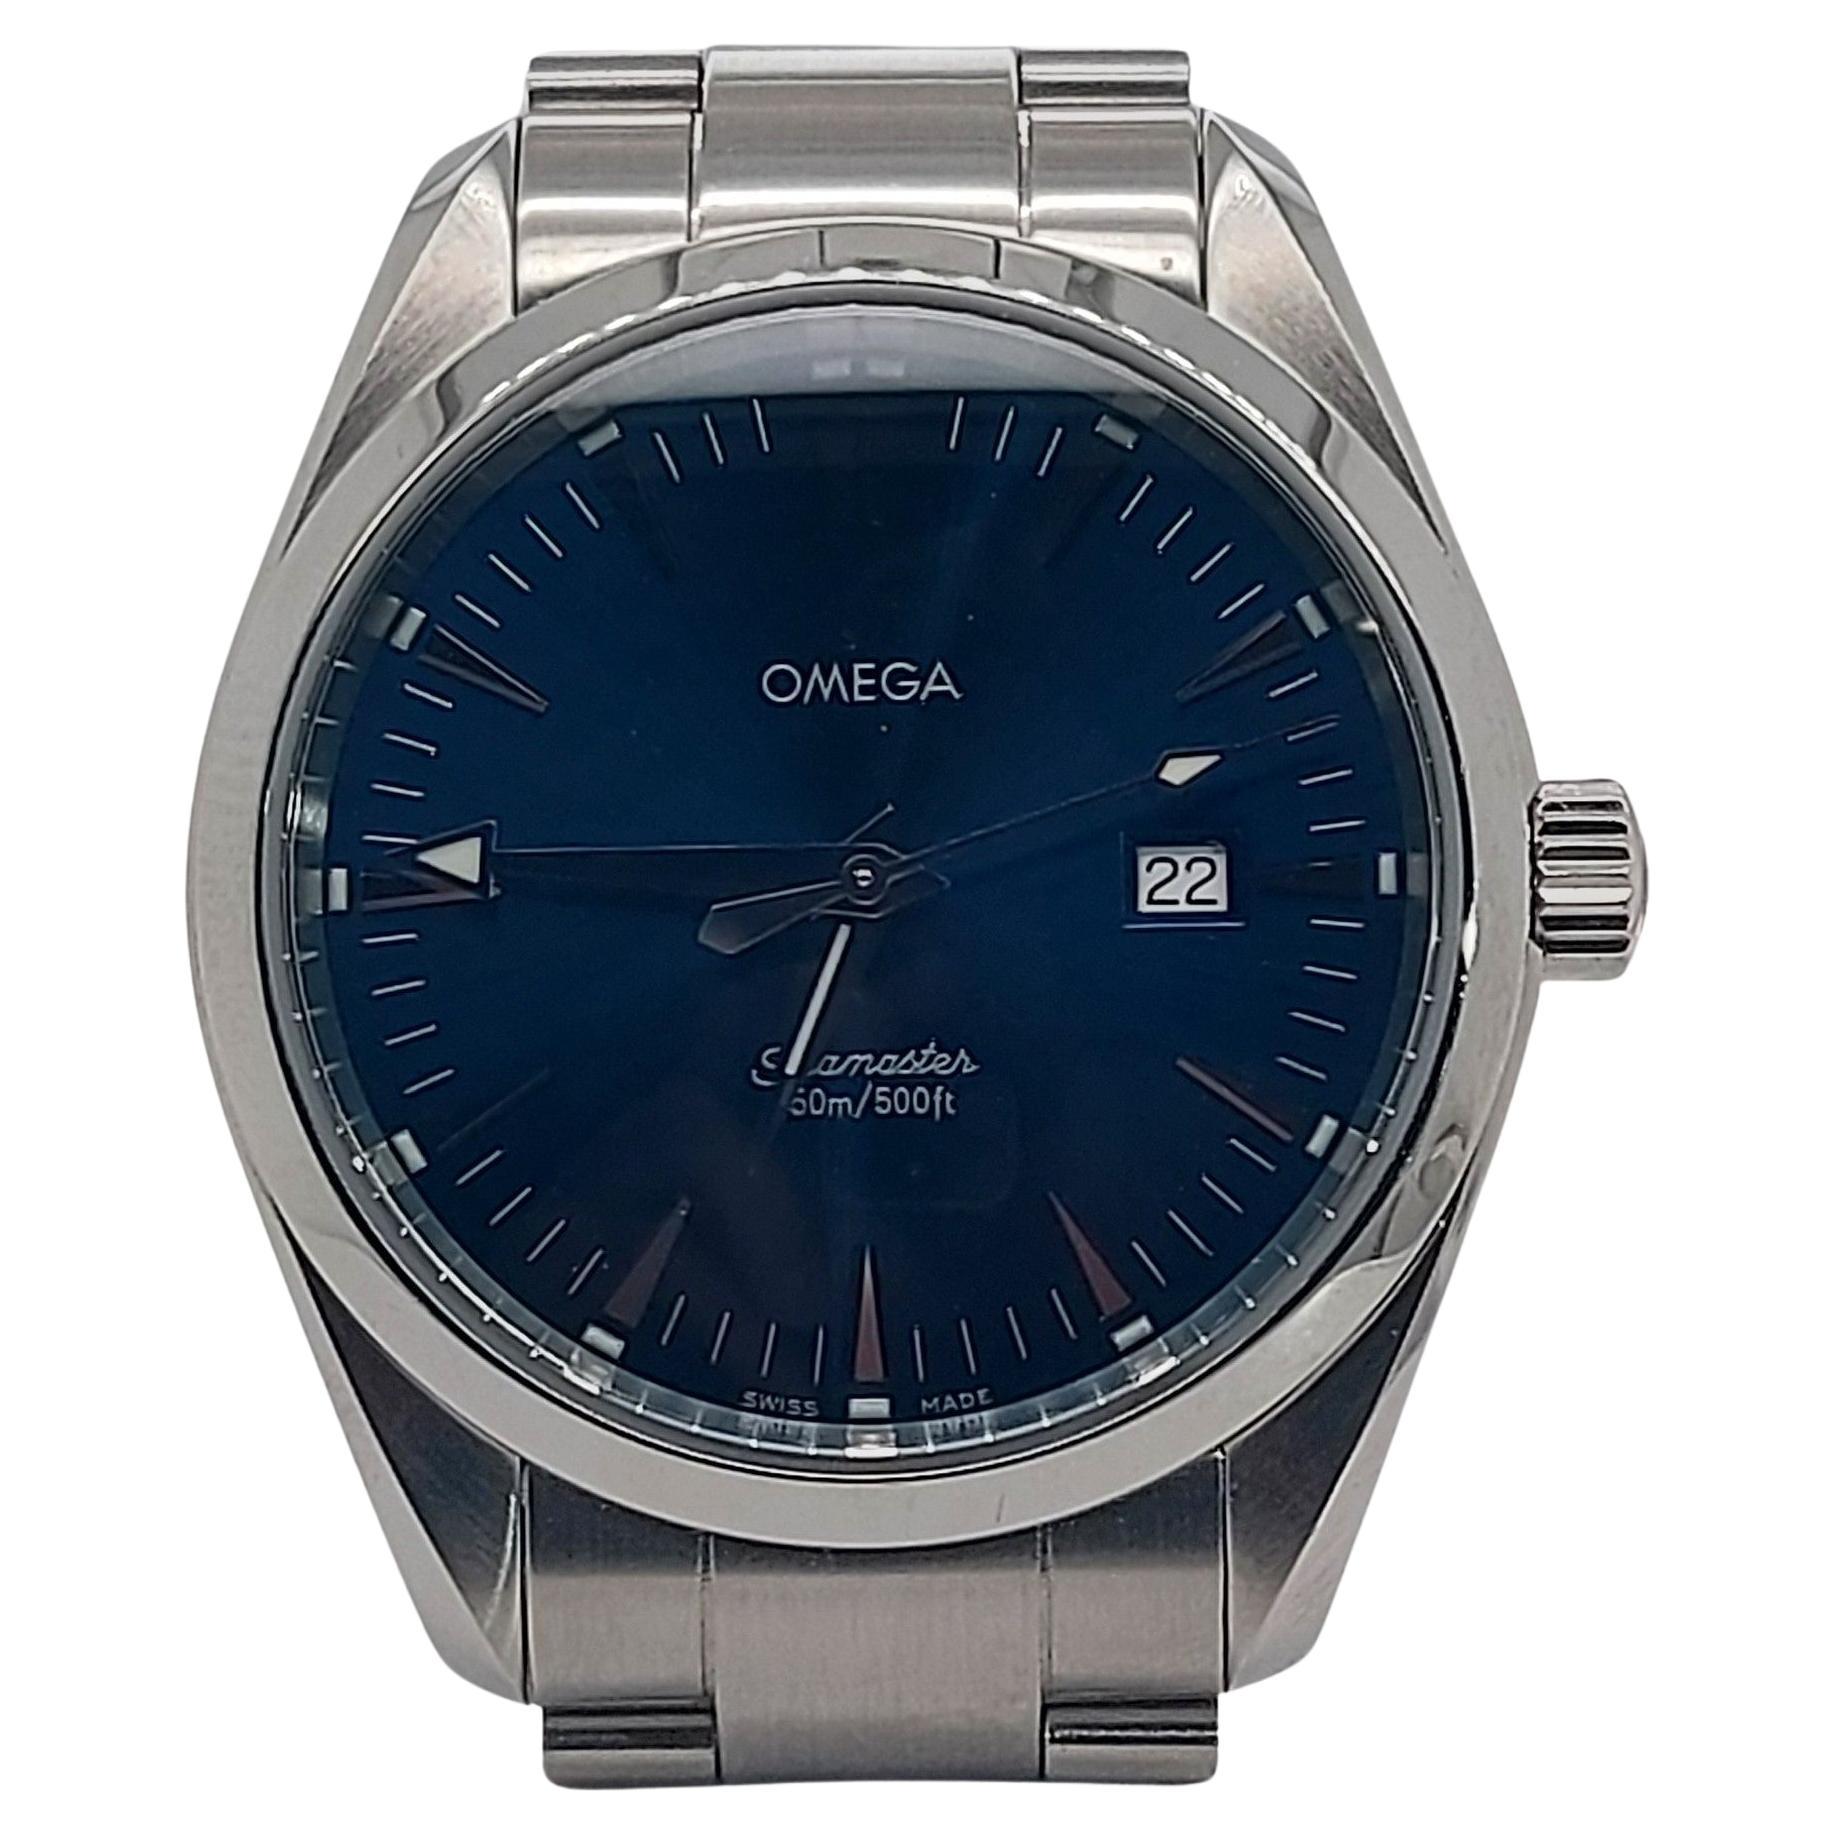 Omega Seamaster Aqua Terra, Stainless Steel Quartz, Diameter 39 mm

Movement: Quartz

Indicators: date window at 3 o'clock

Functions: hours, minutes, sweep seconds, date

Case: Stainless steel, sapphire crystal, screw down crown, diameter 39.3 mm,